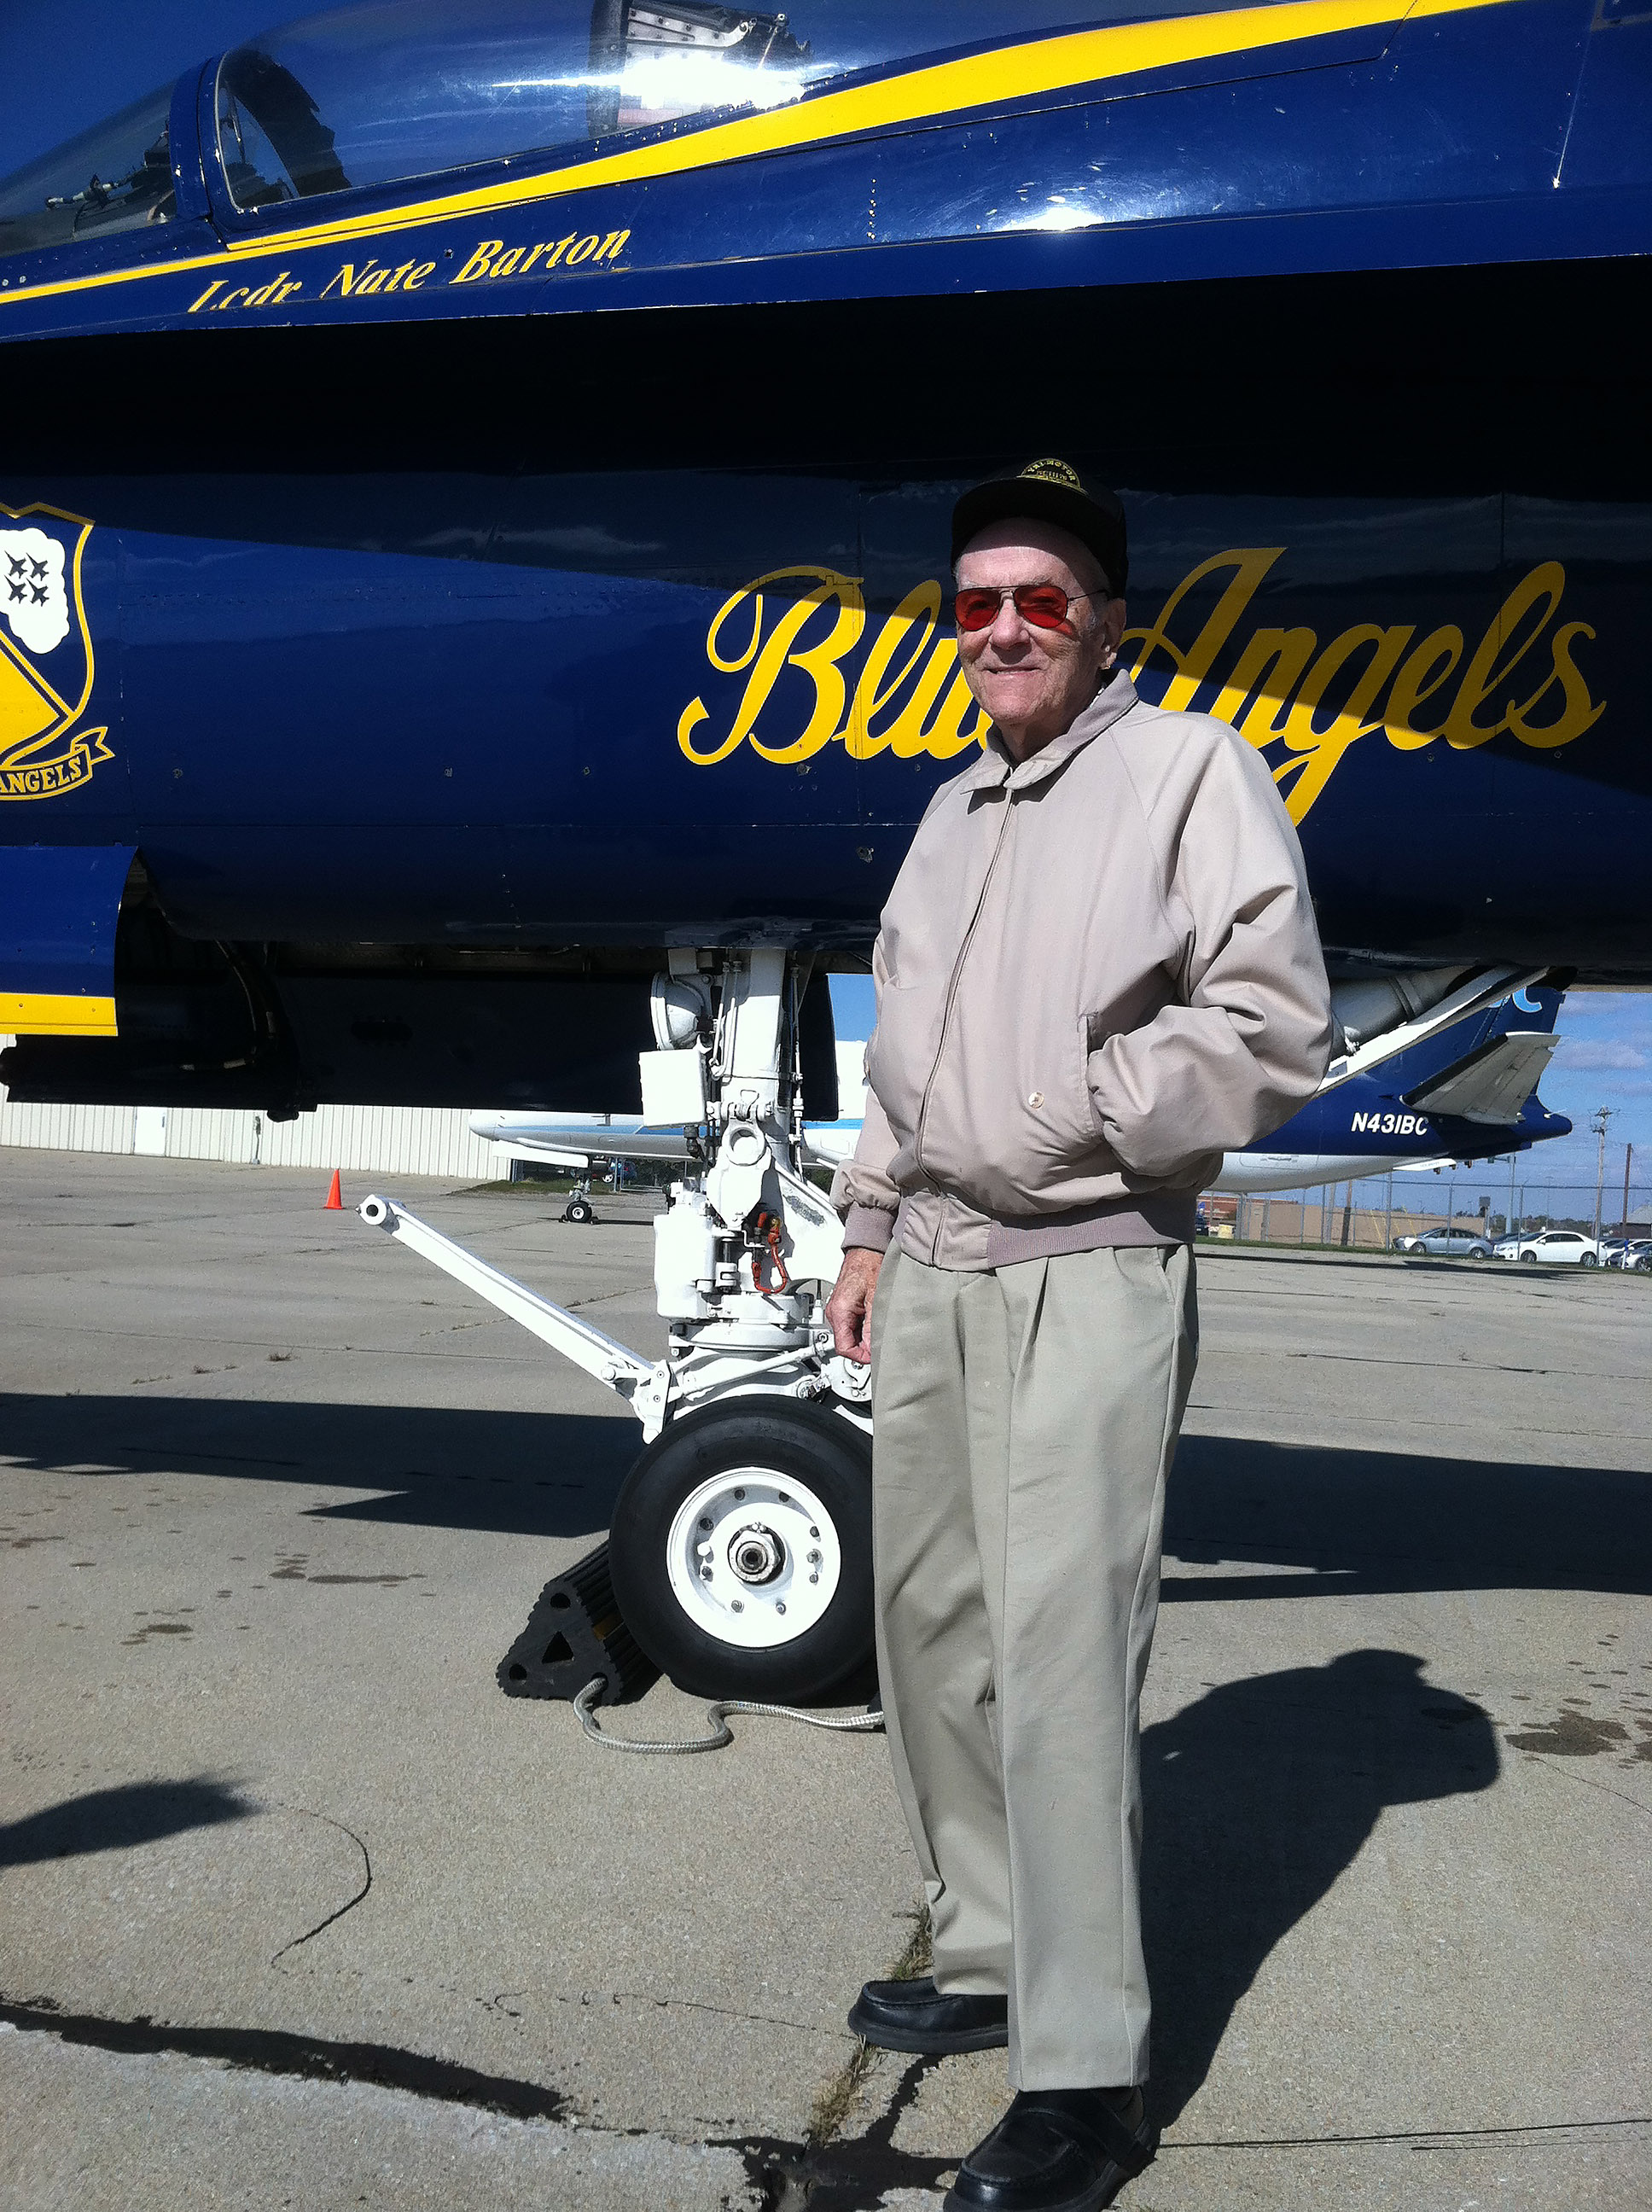 Pilot and Wisconsin aviation entrepreneur Bill Brennand, who helped establish EAA AirVenture's popular Seaplane Base, stands near a Blue Angels navy jet. Photo courtesy of Jim Cunningham.